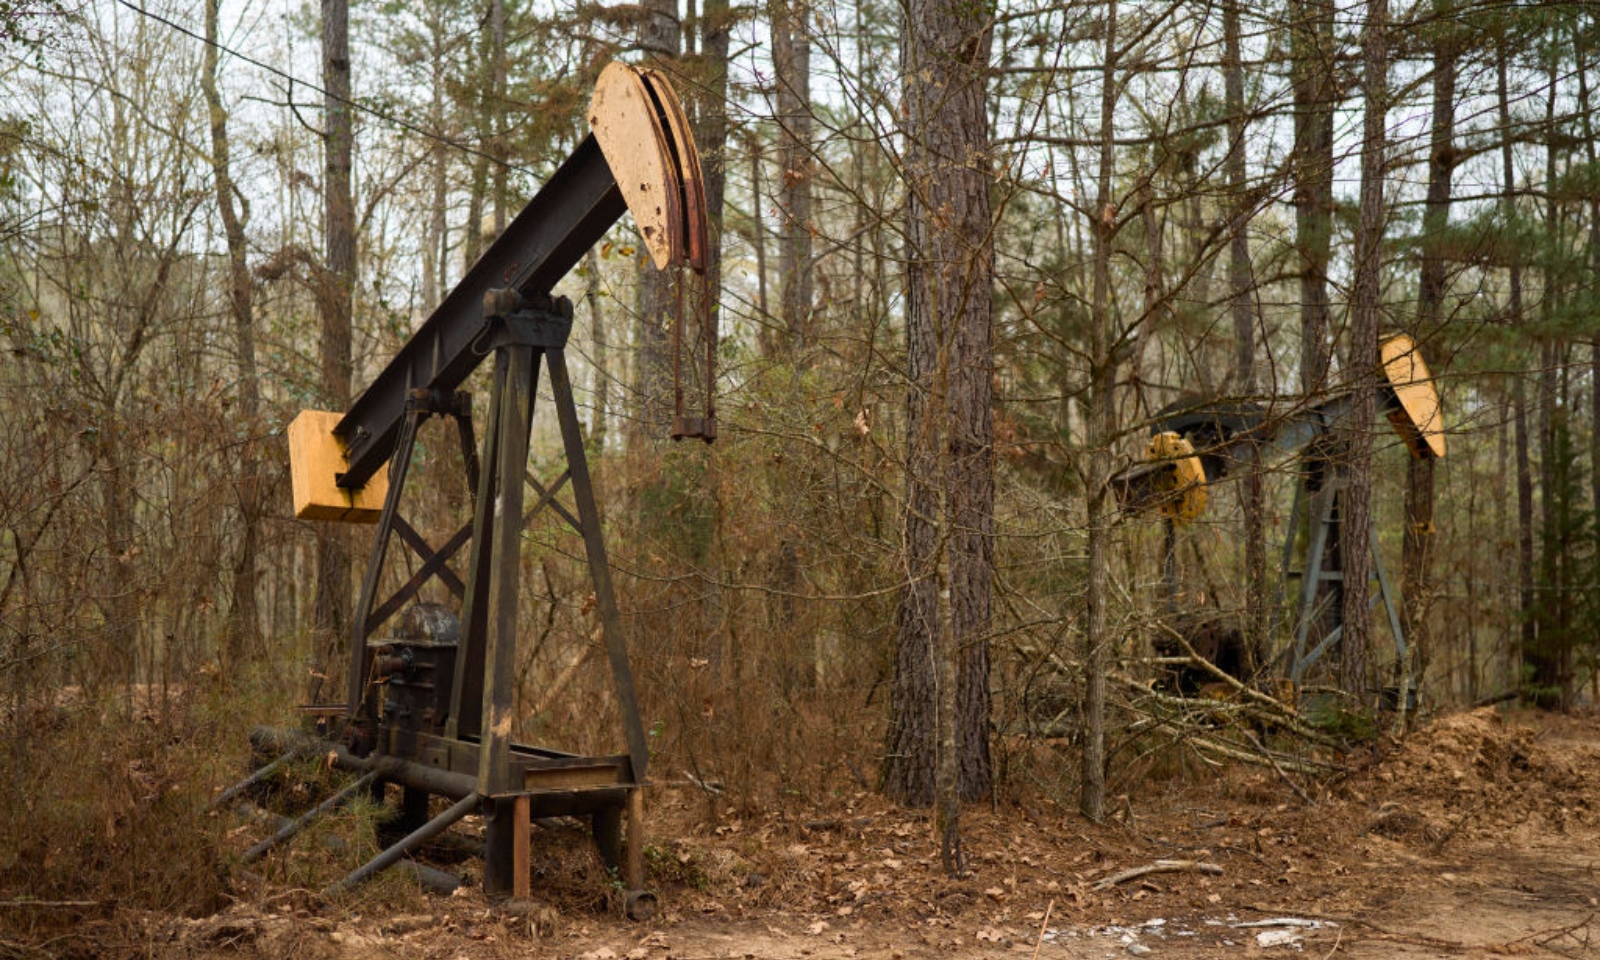 Abandoned wells in a forest in Louisiana